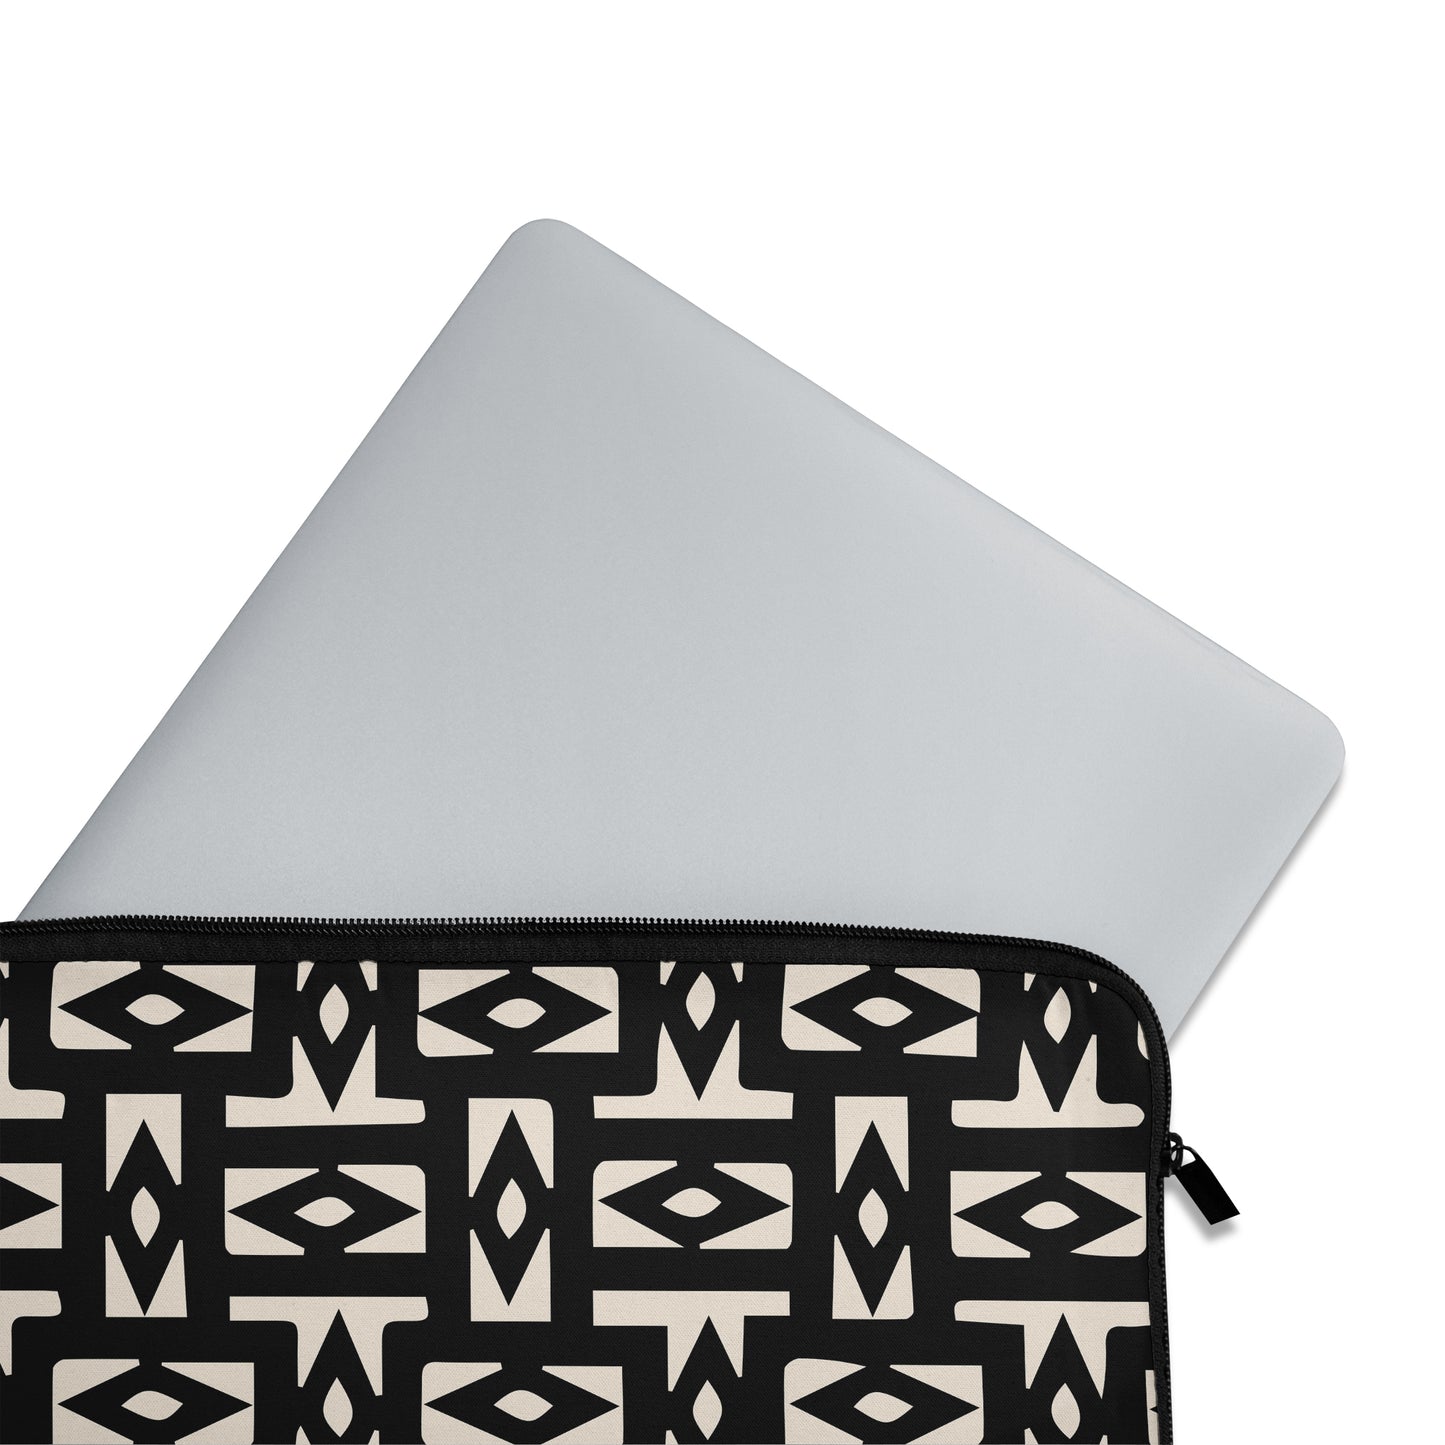 Black and White Macbook Cleeve - Art Deco Style